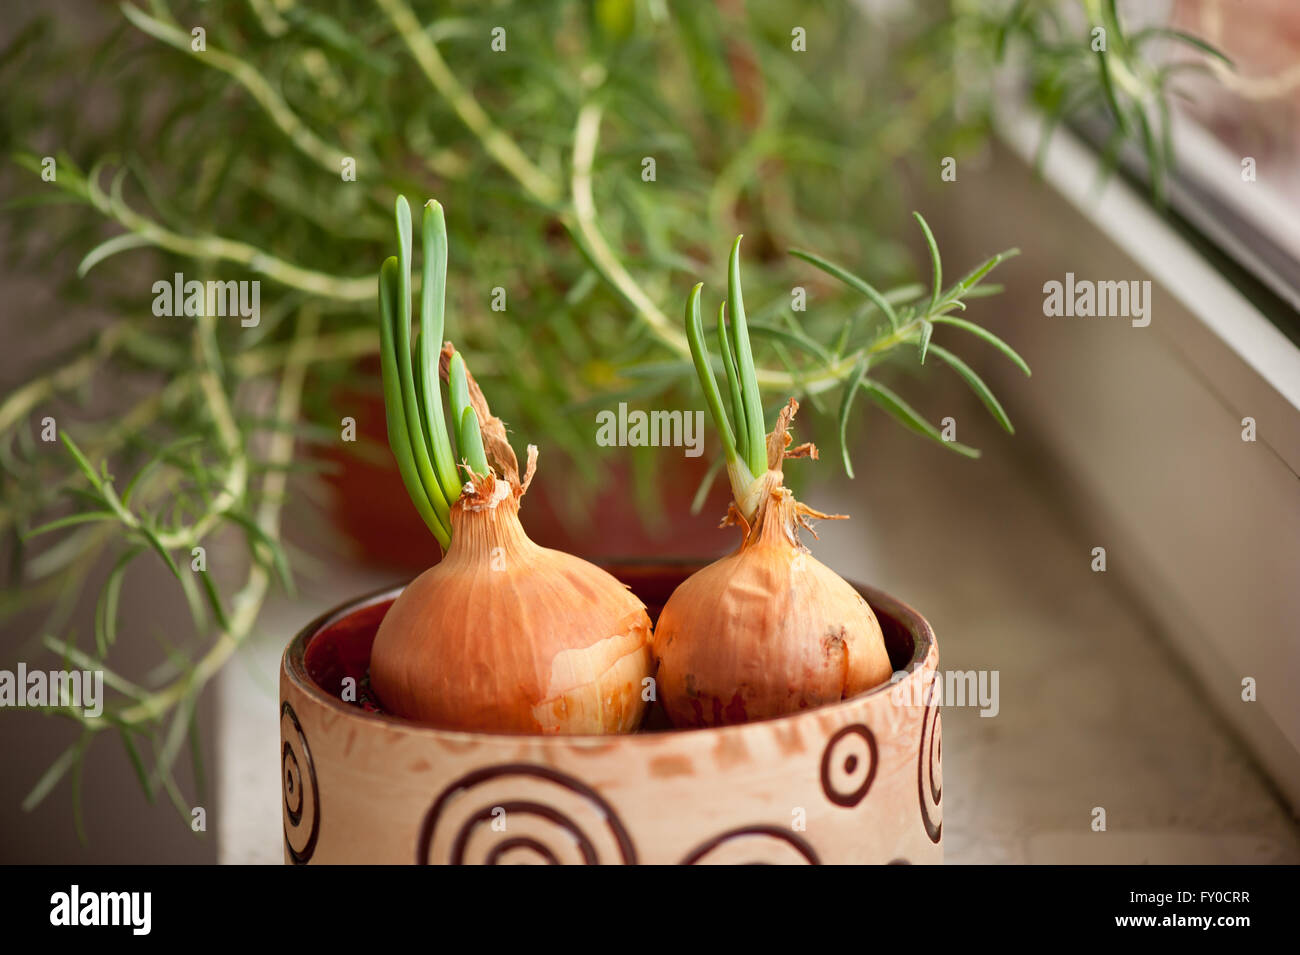 Onions sprouted with greens, vegetables set in a small bowl with water in decorative flower planter and Rosemary shrub. Stock Photo